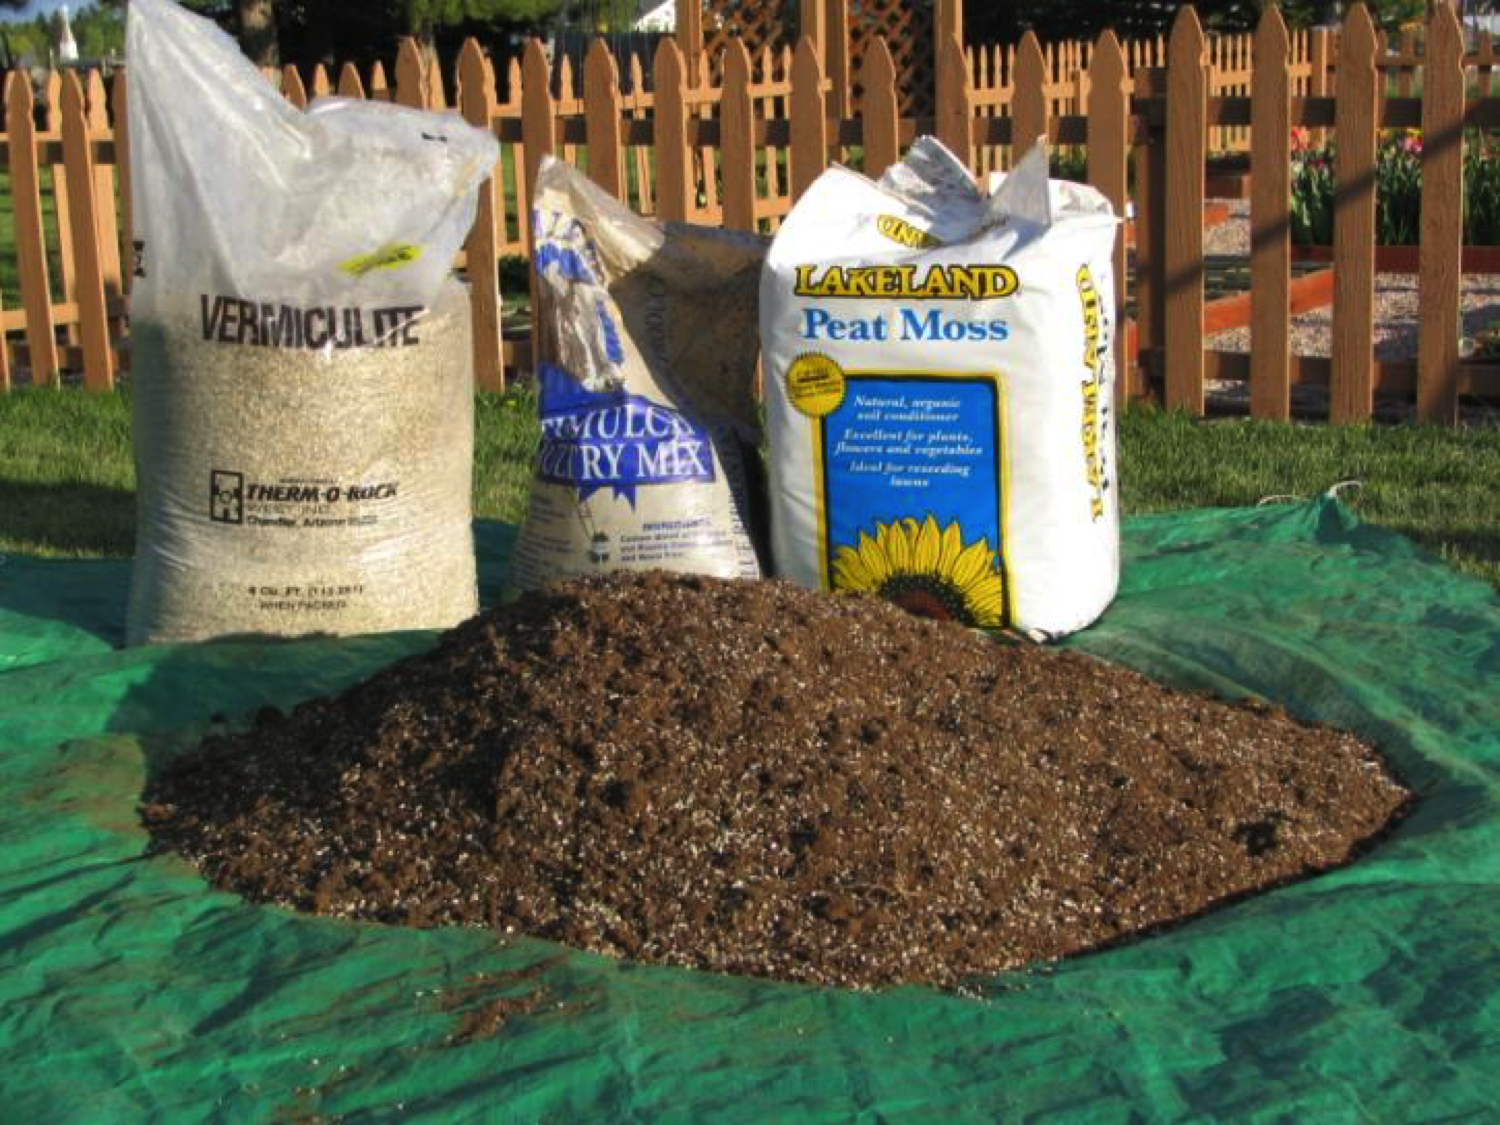 Square Foot Gardener: How to Make Your Own Professional Growing Soil: Mels' Mix